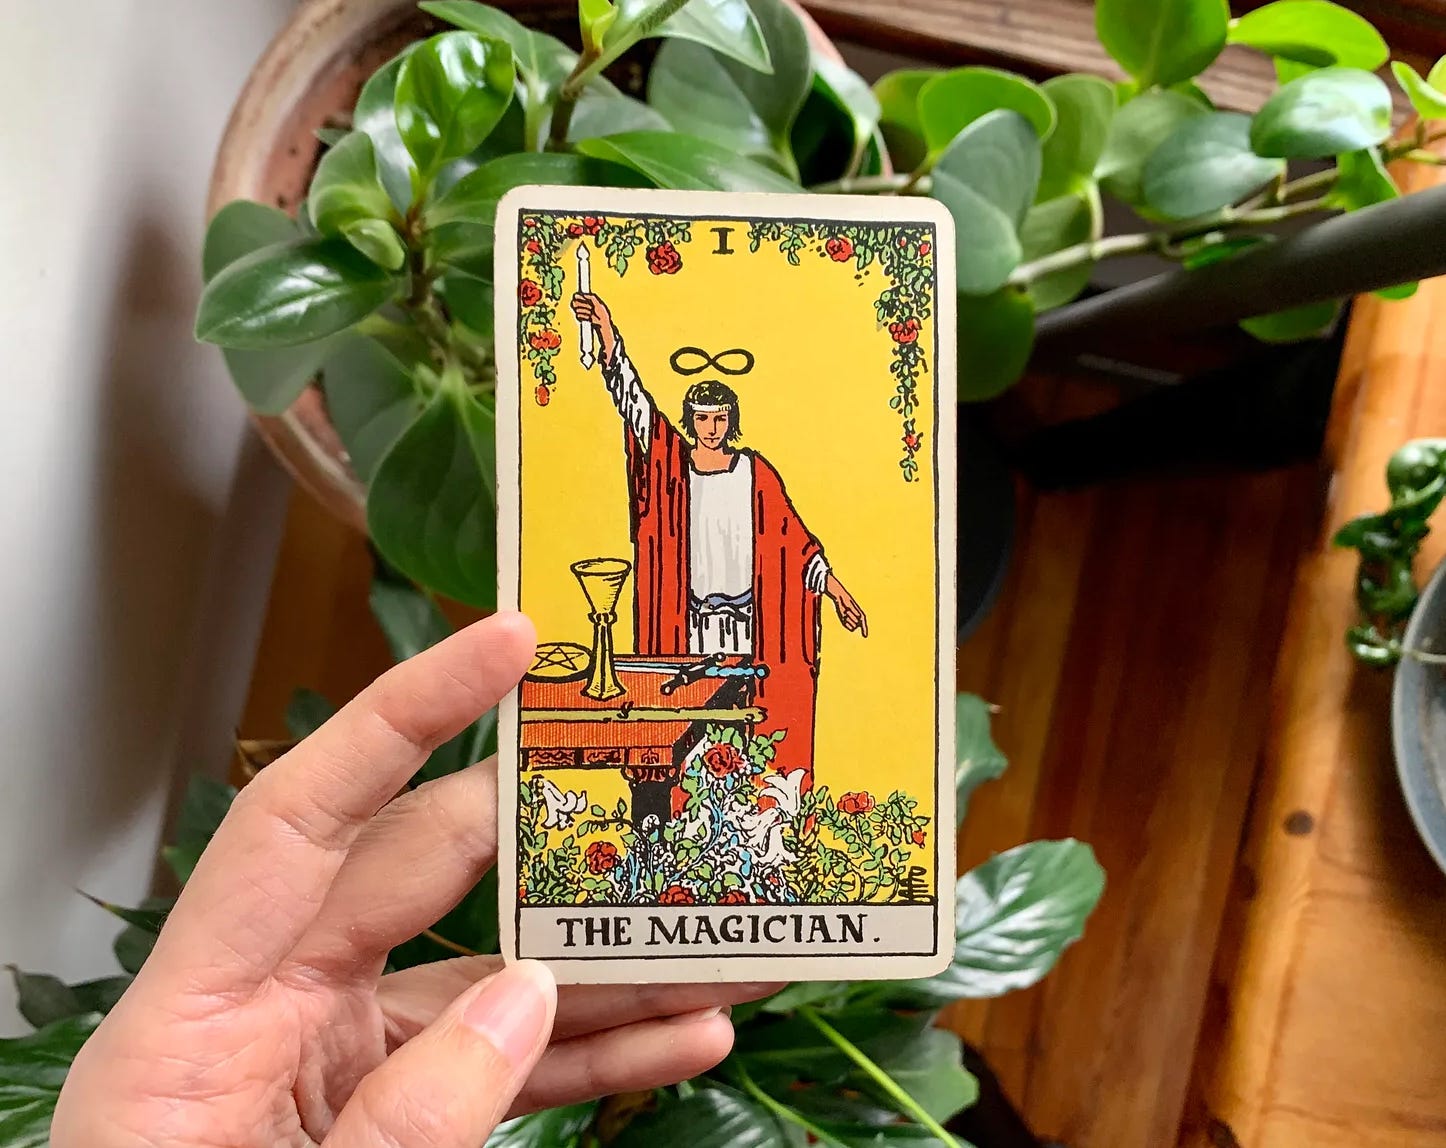 A hand is holding a tarot card, The Magician by Pamela Colman Smith. In the image a person is wearing red and white, holding one hand to the sky and pointing the other to earth. They are standing in front of a bench with four objects on it, a pentacle, cup, sword and wand. Behind the card is a wood floor, wood table and wooden bench with houseplants around.